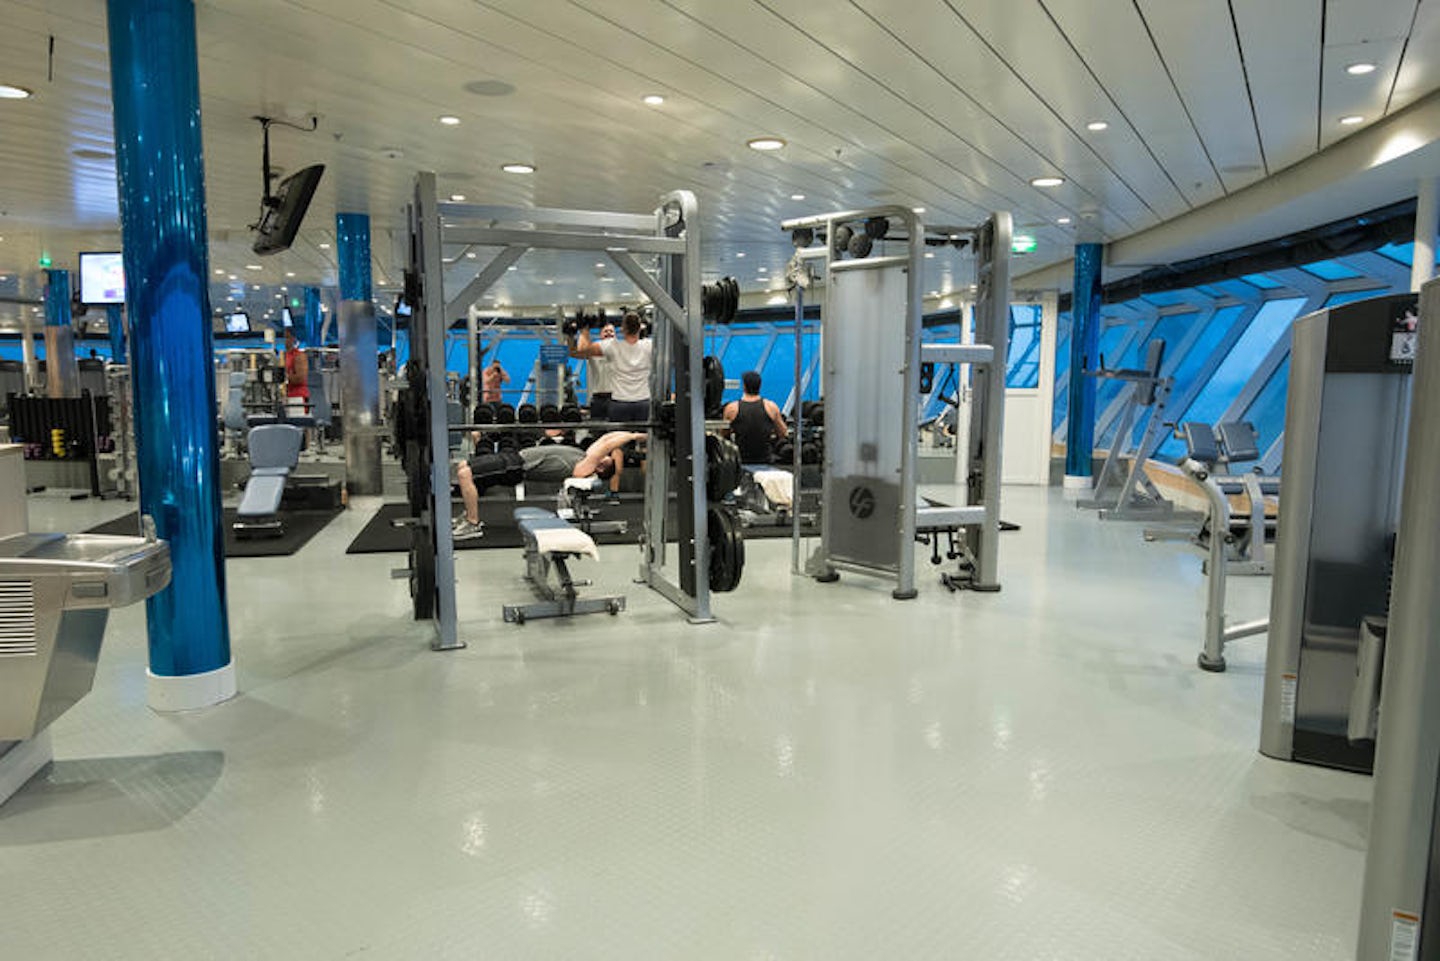 Vitality Fitness Center on Freedom of the Seas